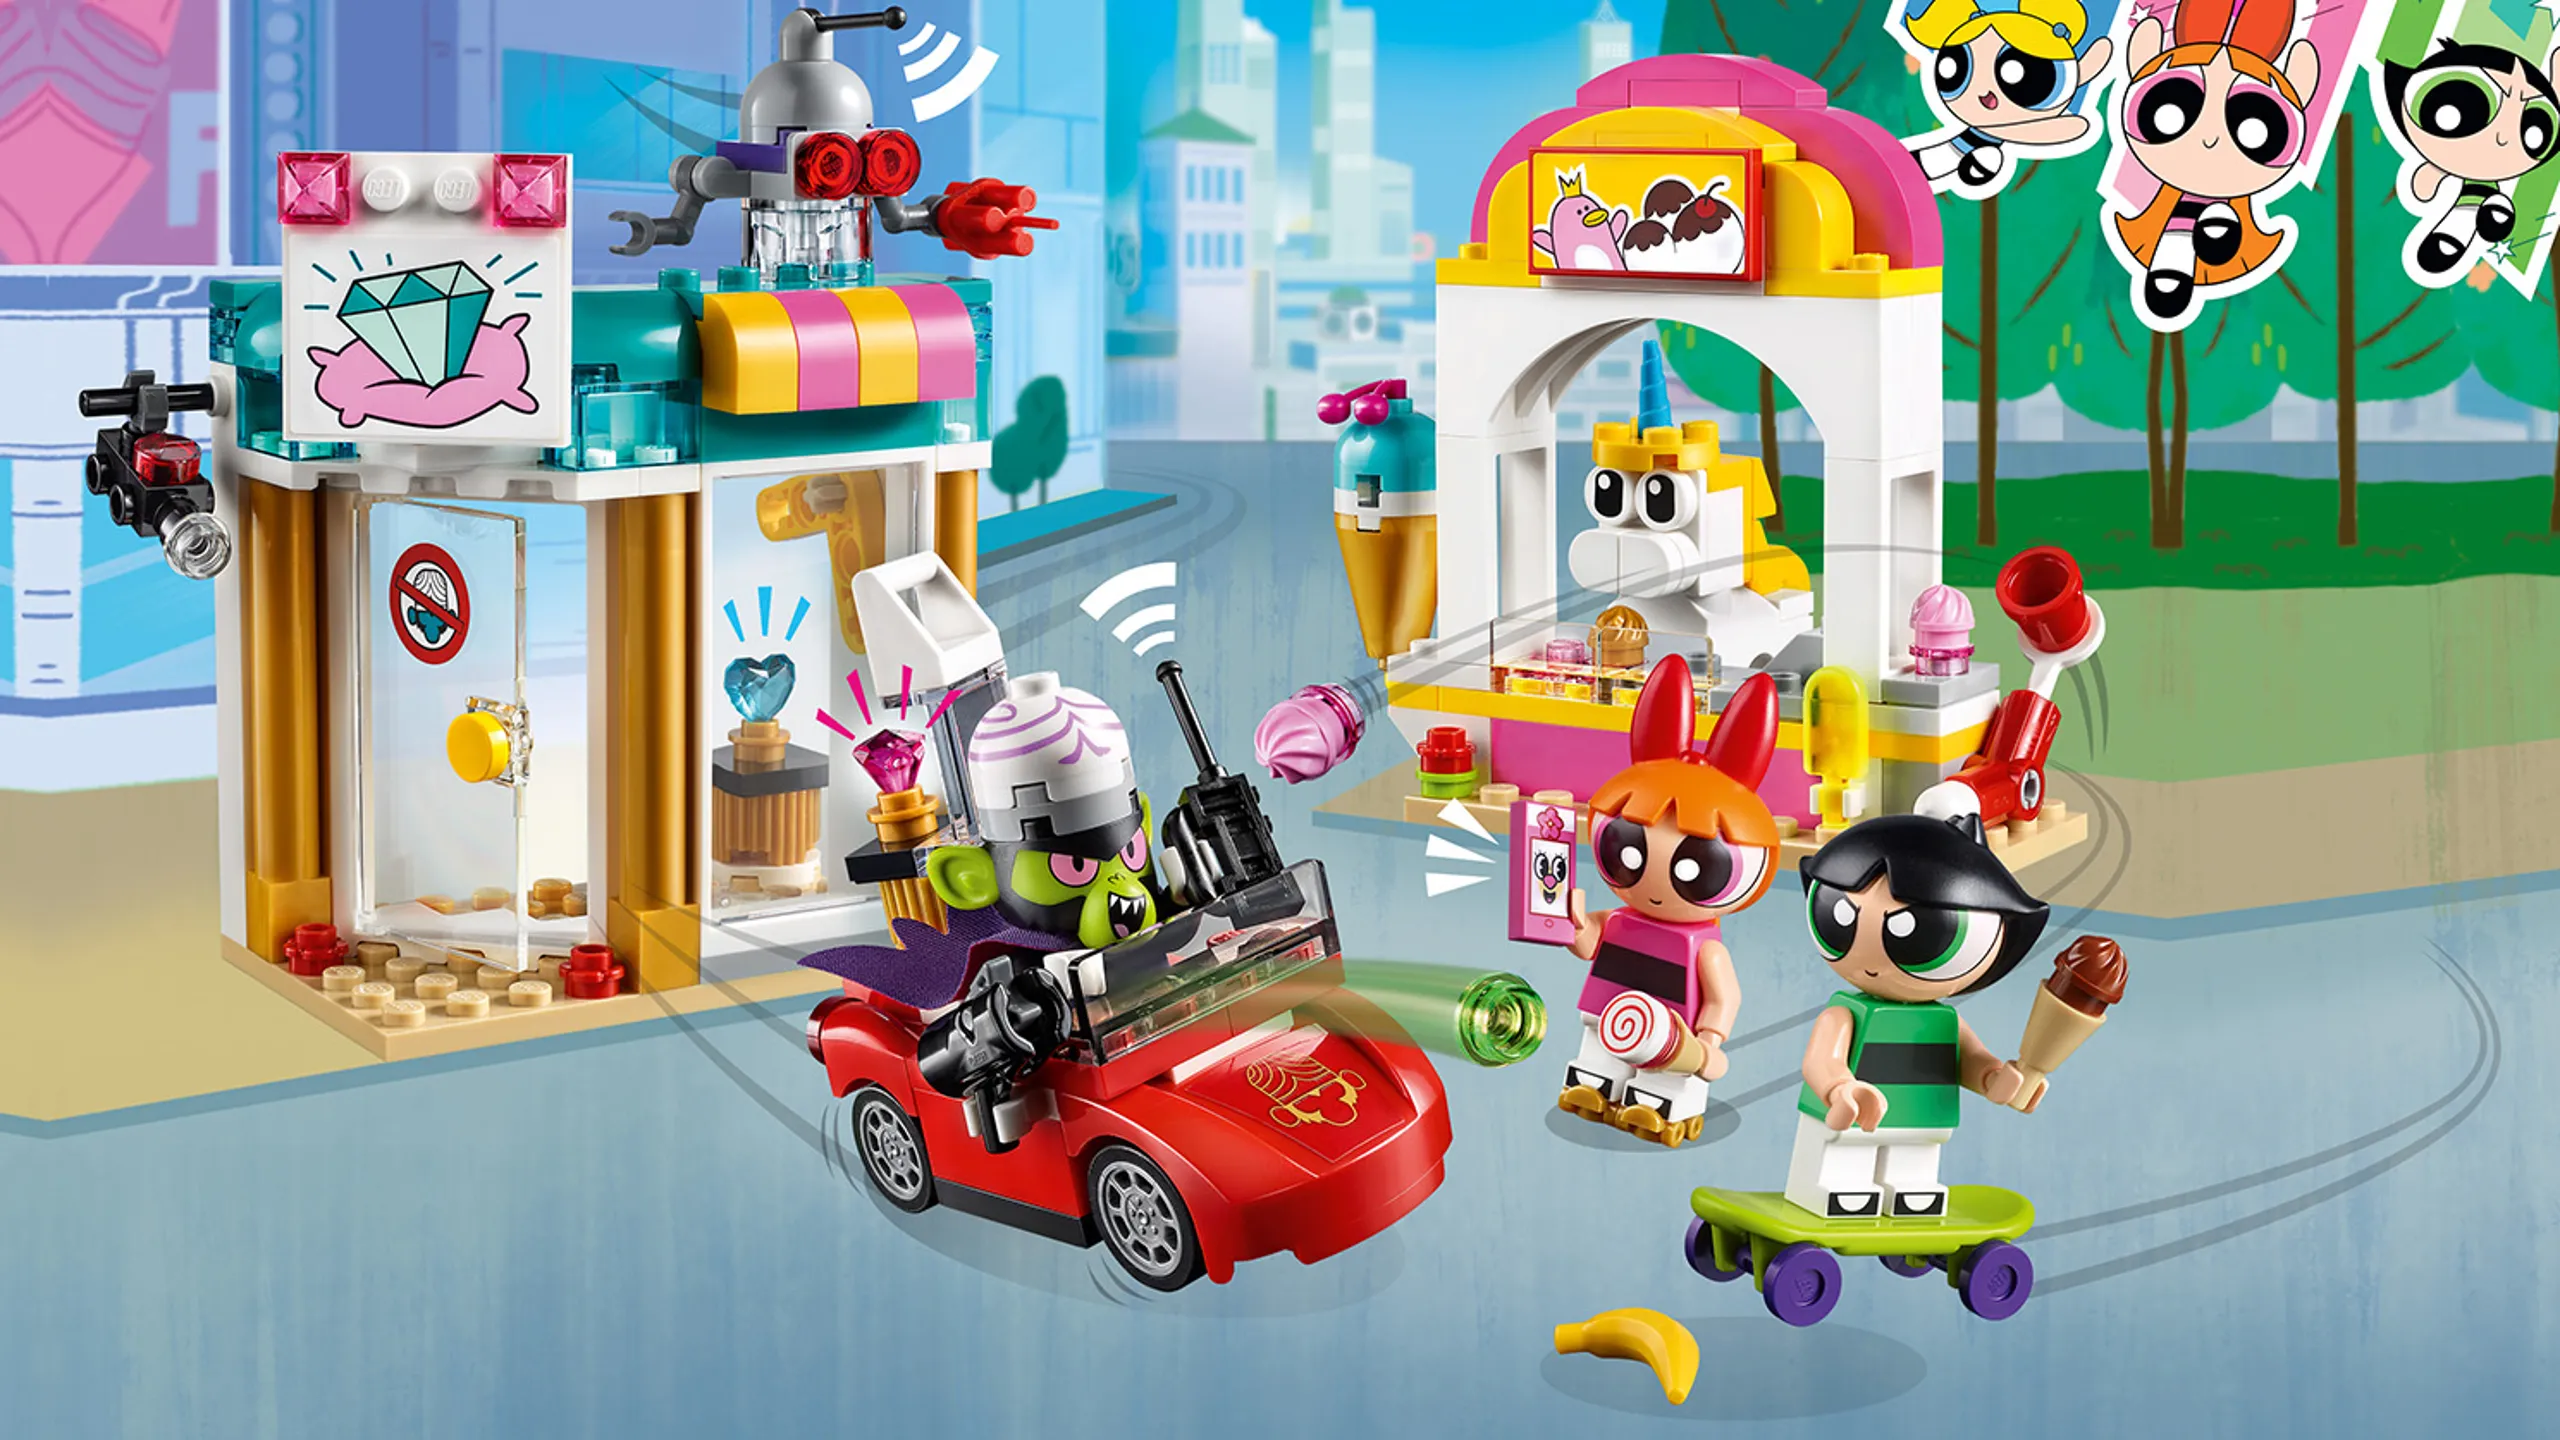 LEGO Powerpuff Girls - 41288 Mojo Jojo Strikes - Powerpuff Girls Blossom and Buttercup has just bought ice creams in the city as Mojo Jojo attacks them from his red car.